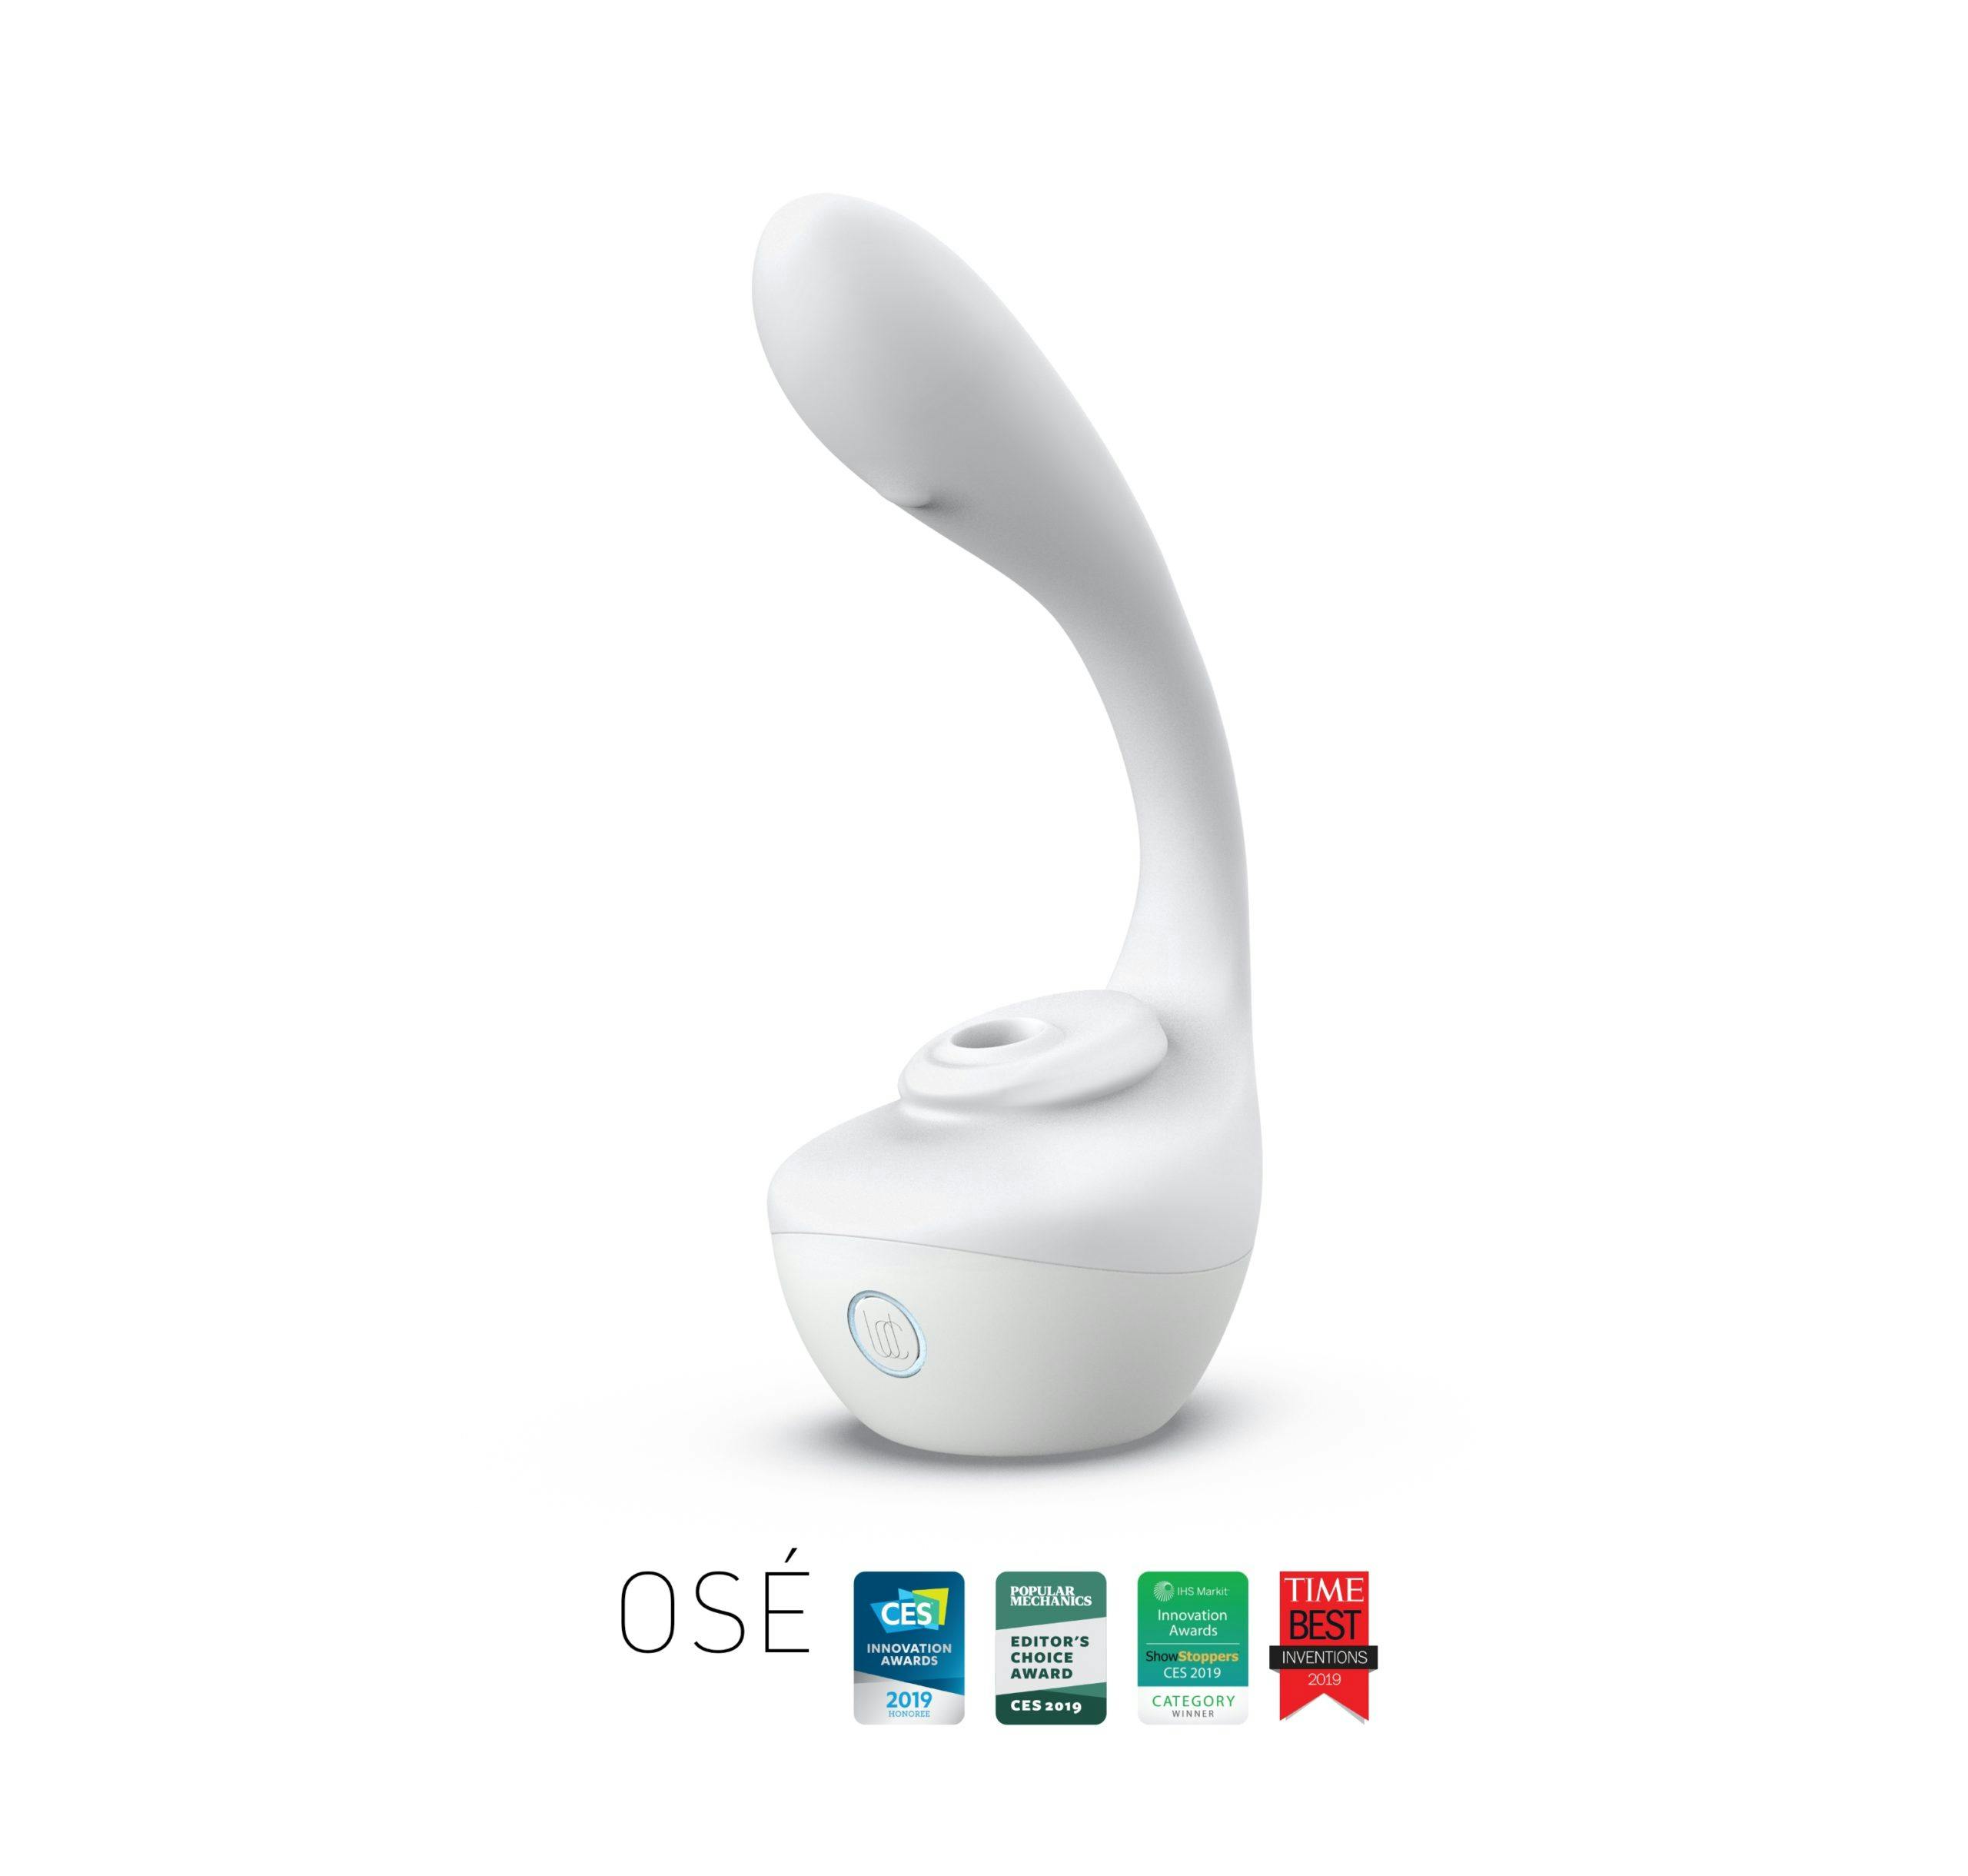 Ces 2020 The Osé May Indicate The Future Of Sex Tech